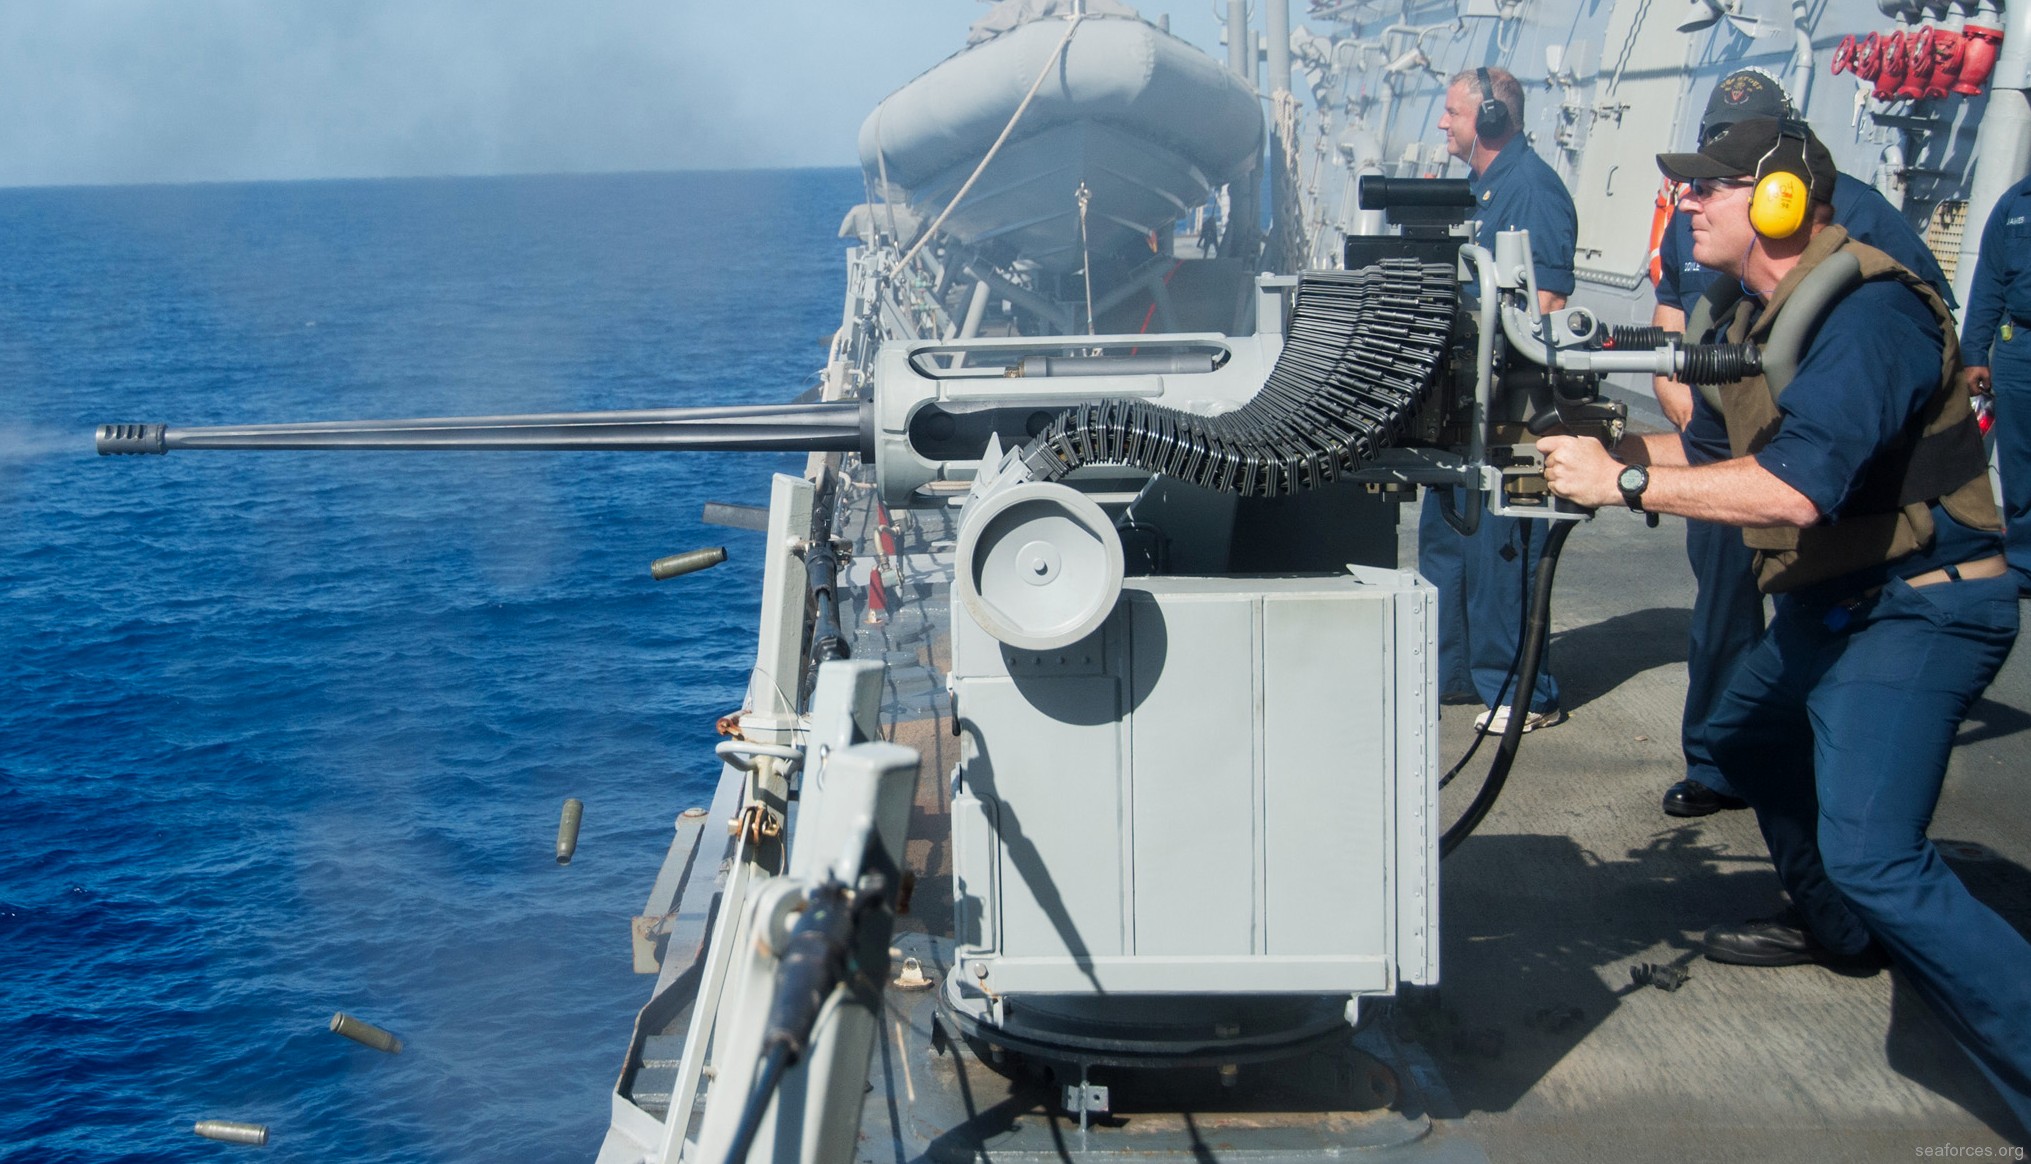 ddg-55 uss stout guided missile destroyer us navy 71 mk-38 mod.1 machine gun system mgs